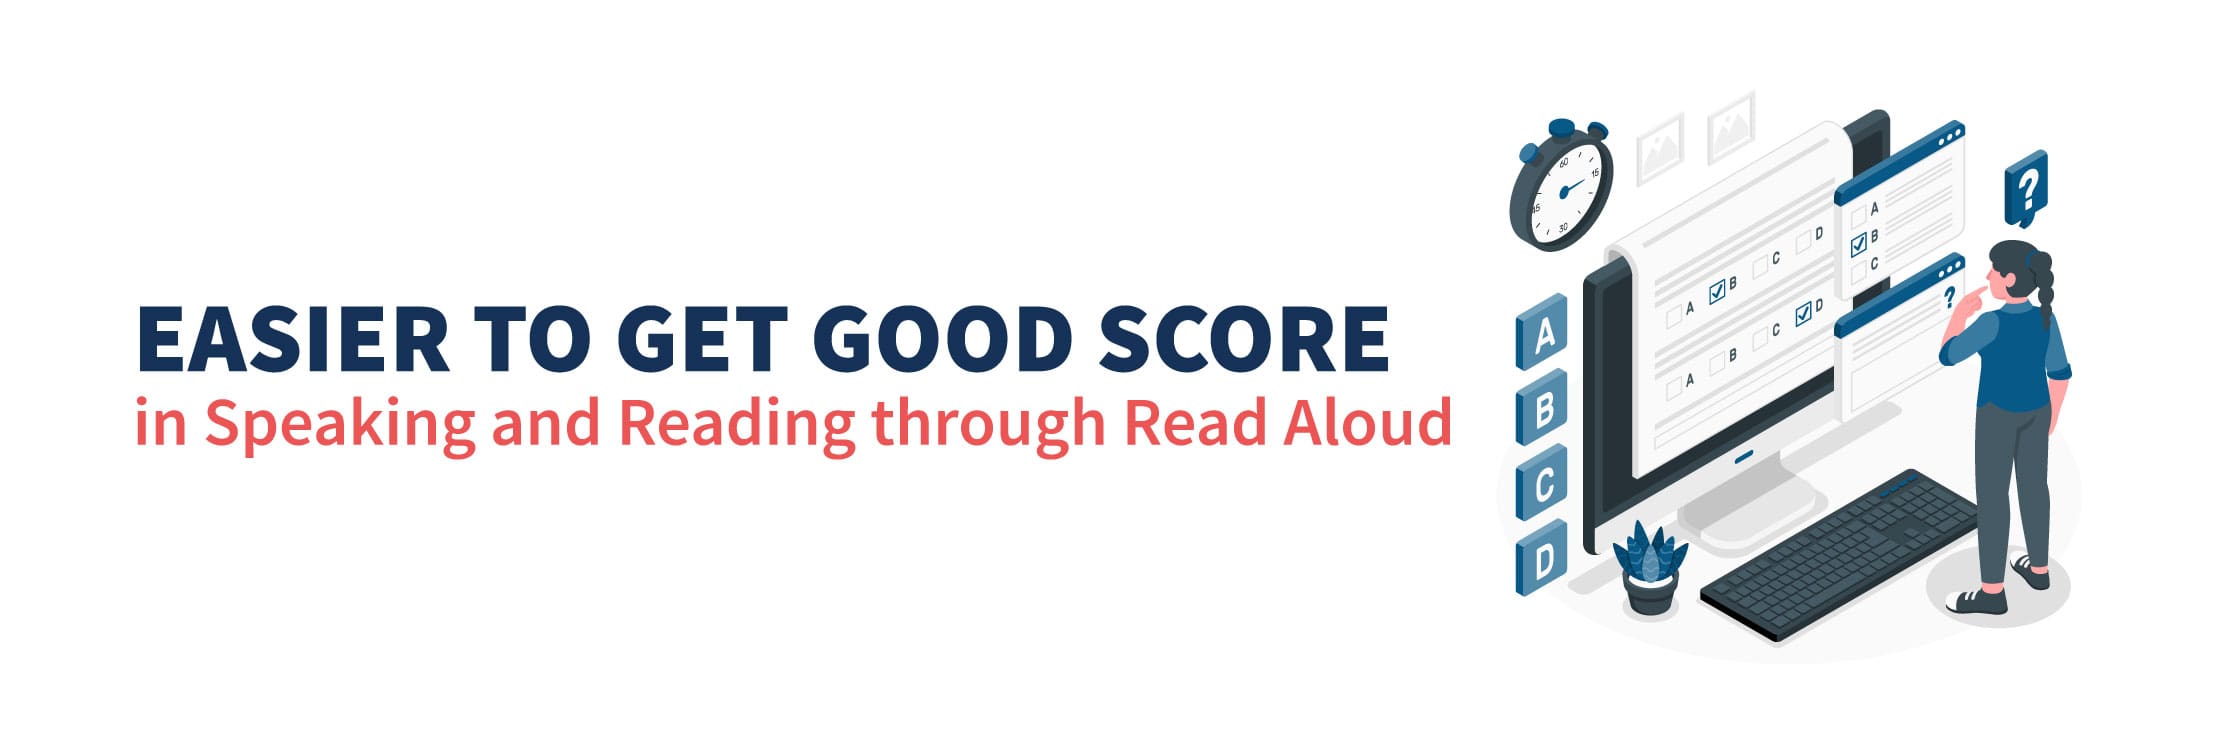 Easier to Get Good Score